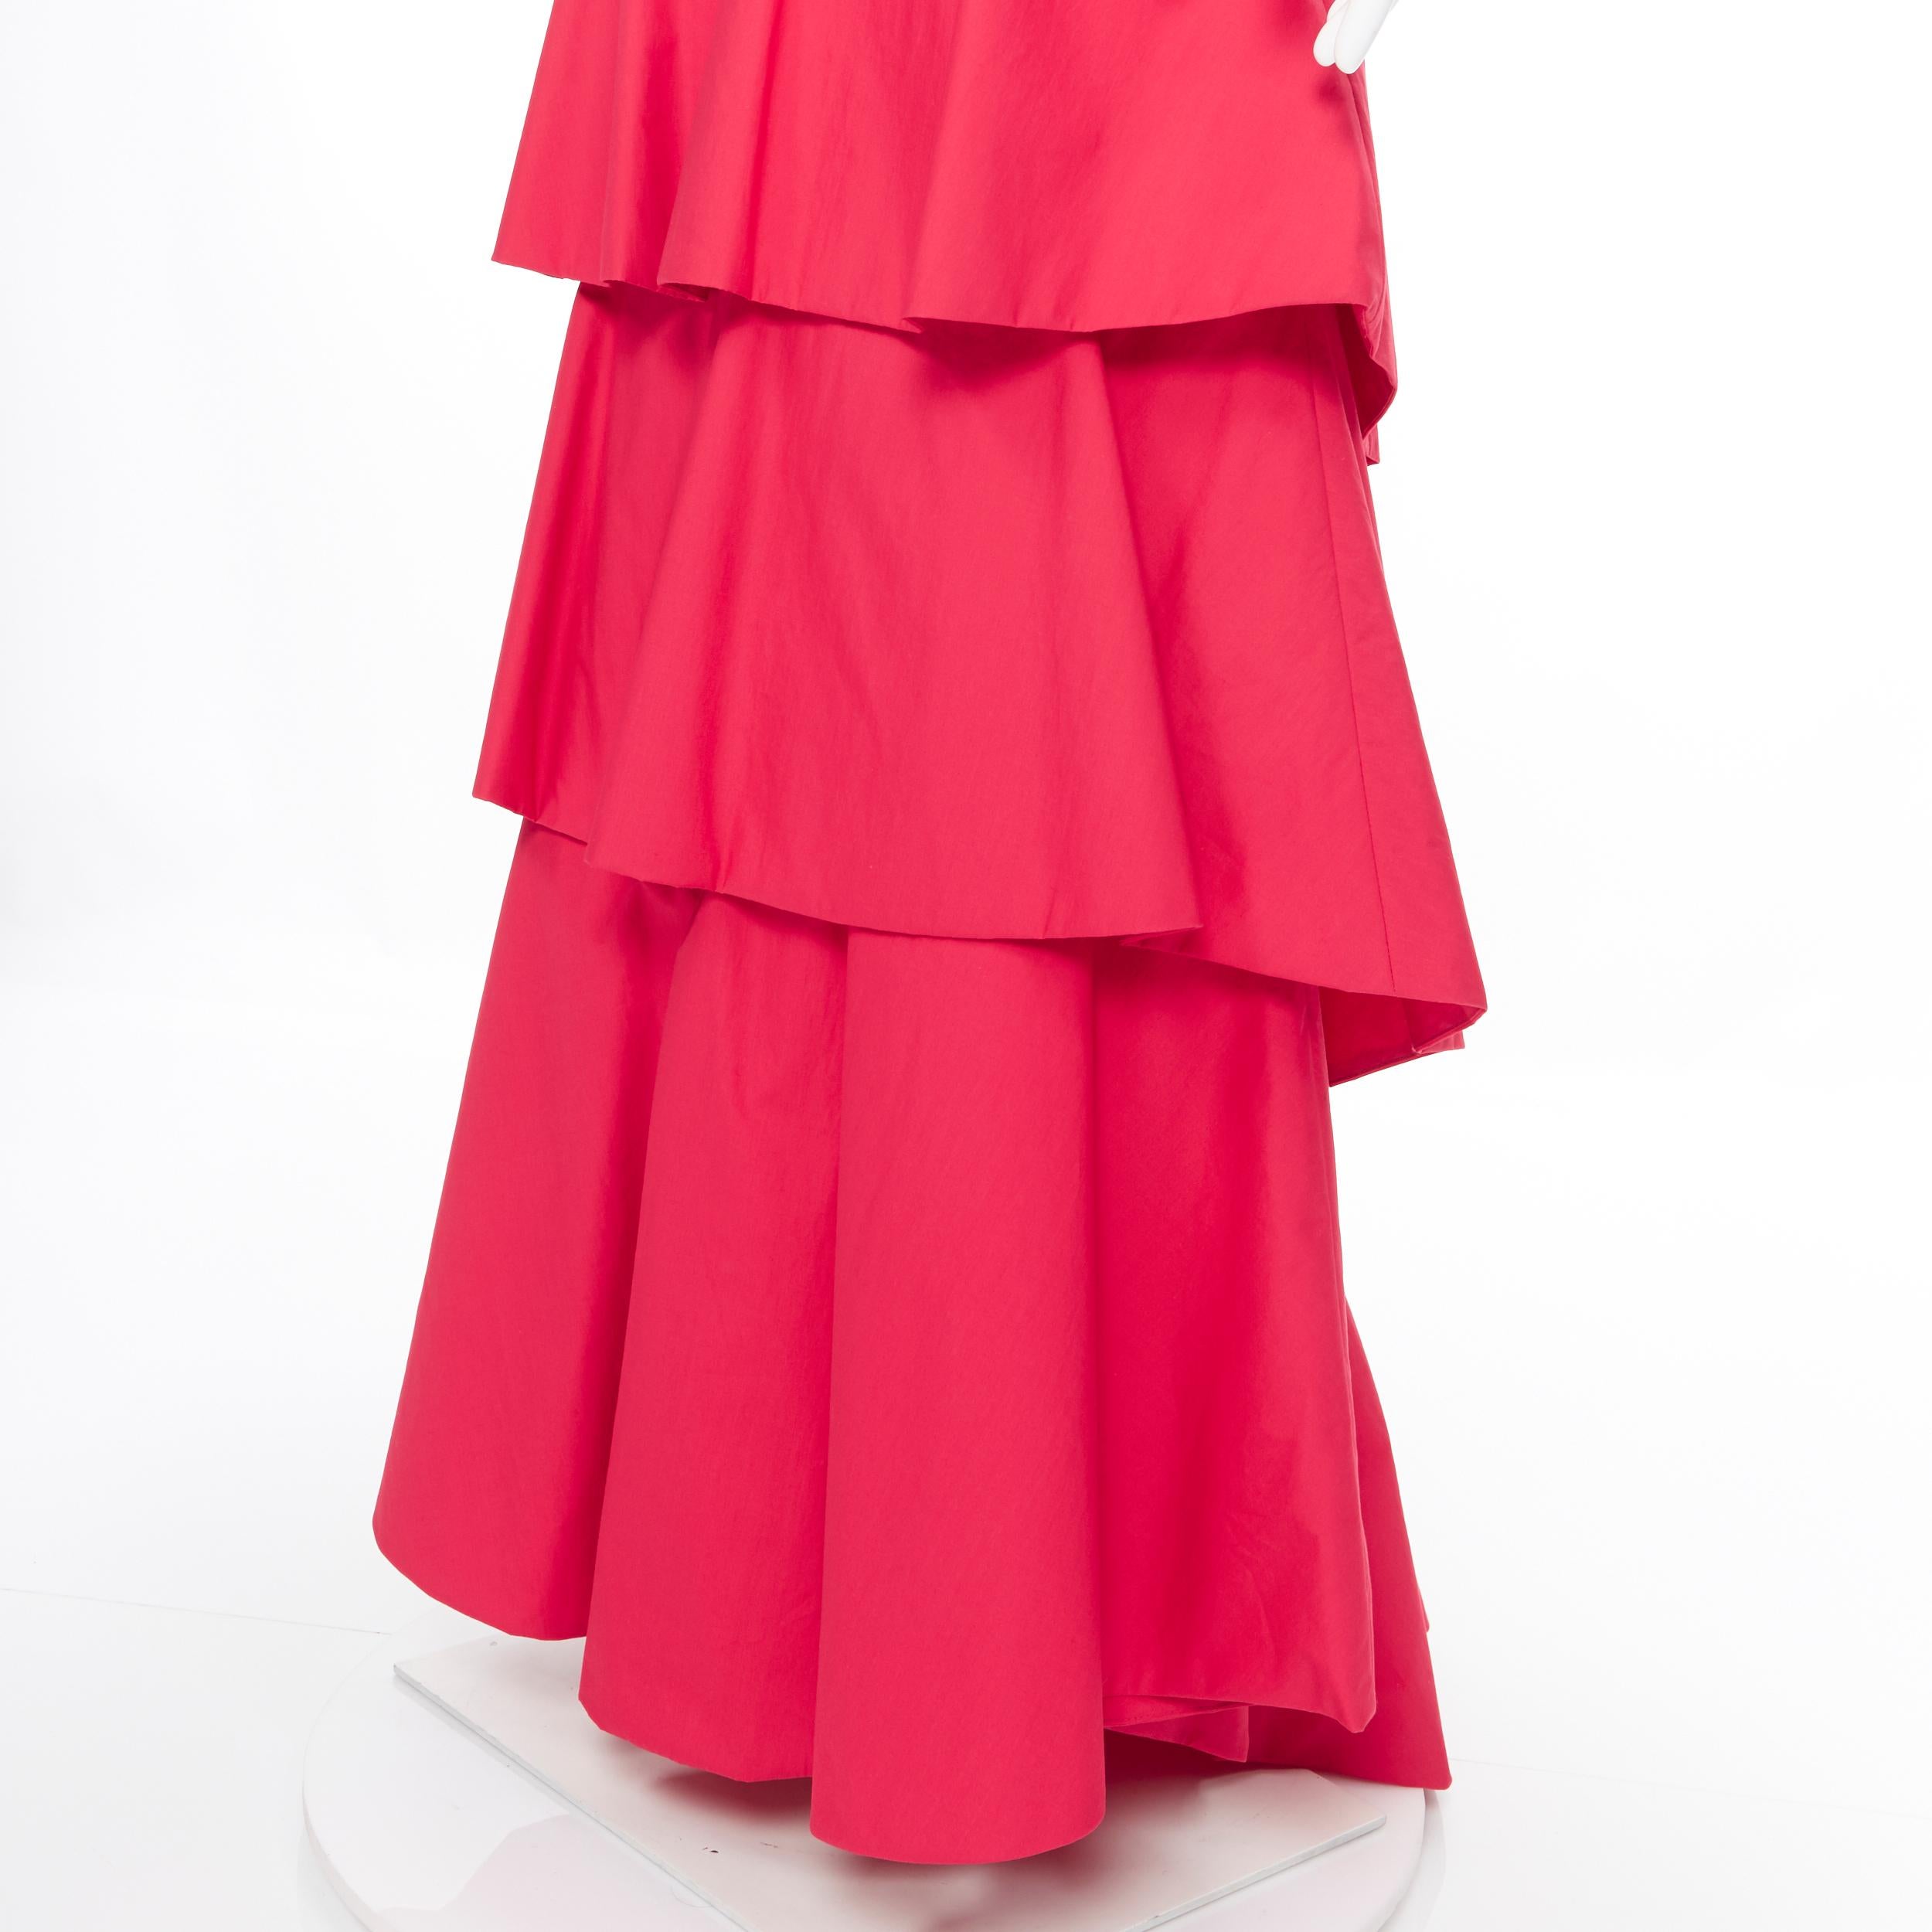 ROSIE ASSOULIN fuscia pink cotton triple tiered convertible spanish skirt US2
Brand: Rosie Assoulin
Designer: Rosie Assoulin
Model Name / Style: Tiered skirt
Material: Cotton
Color: Red
Pattern: Solid
Closure: Zip
Extra Detail: Convertible length,